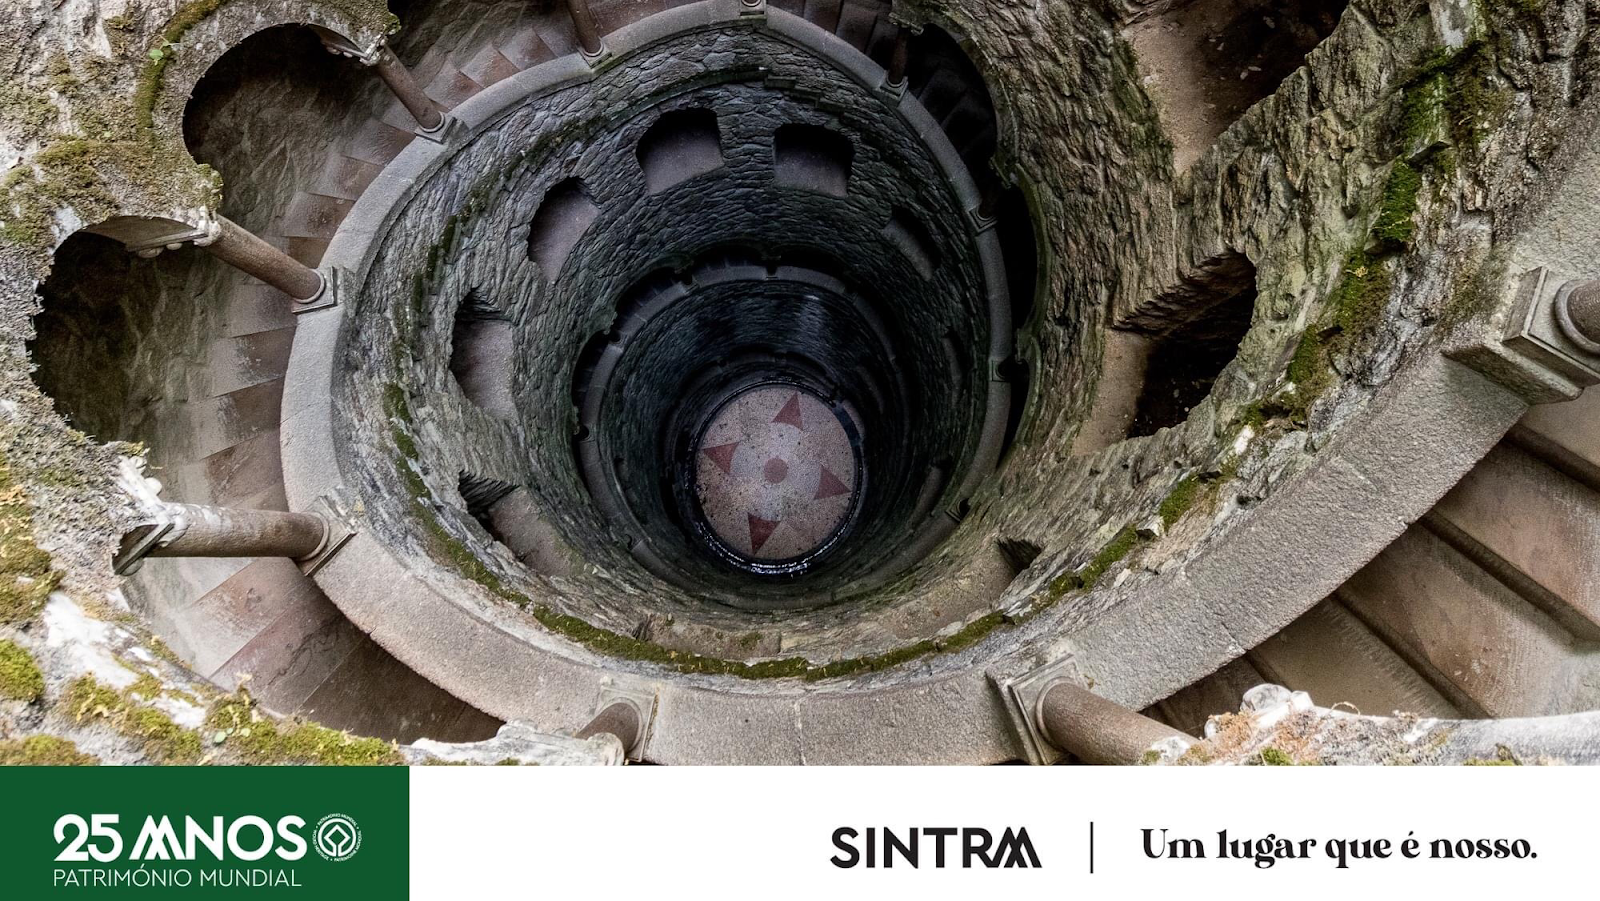 Image - Initiation Well